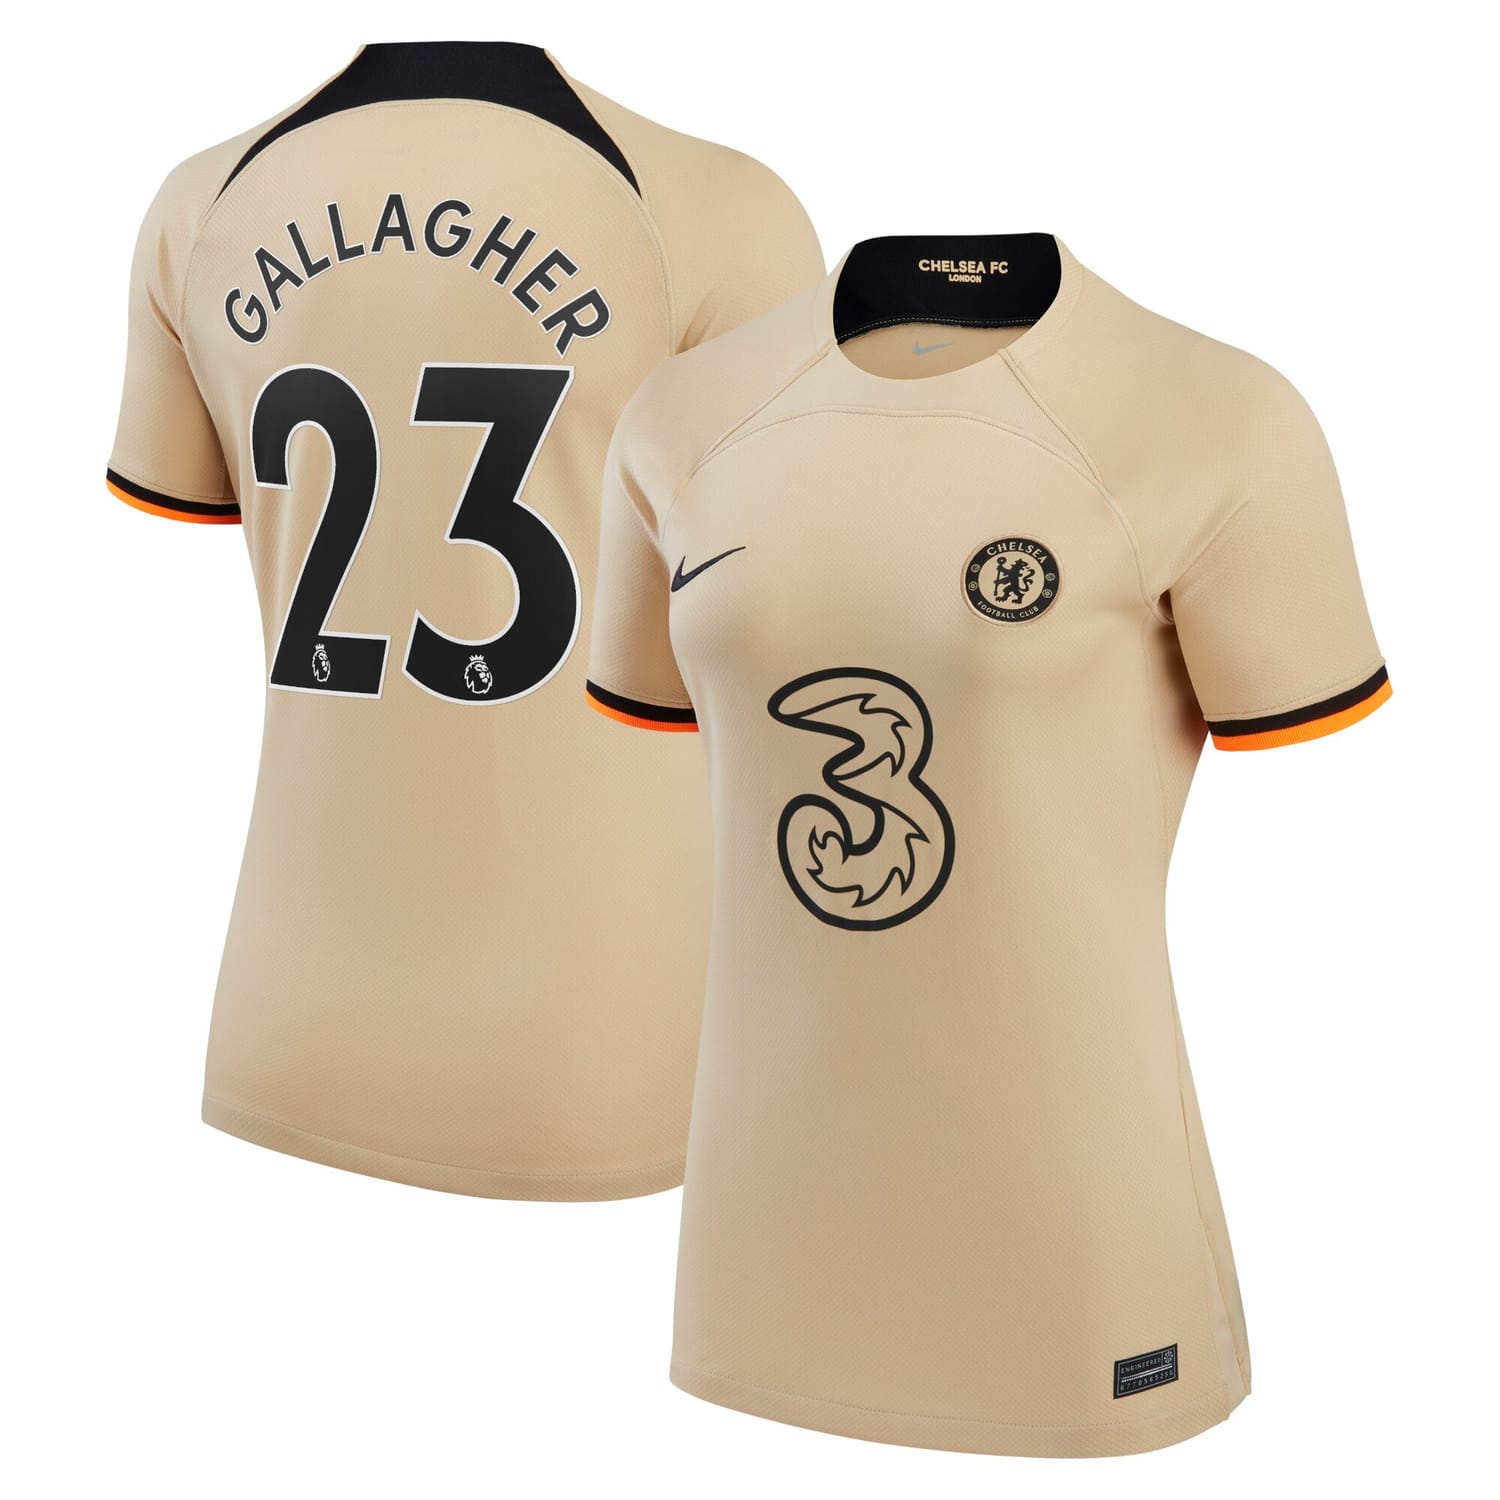 Premier League Chelsea Third Jersey Shirt 2022-23 player Conor Gallagher 23 printing for Women